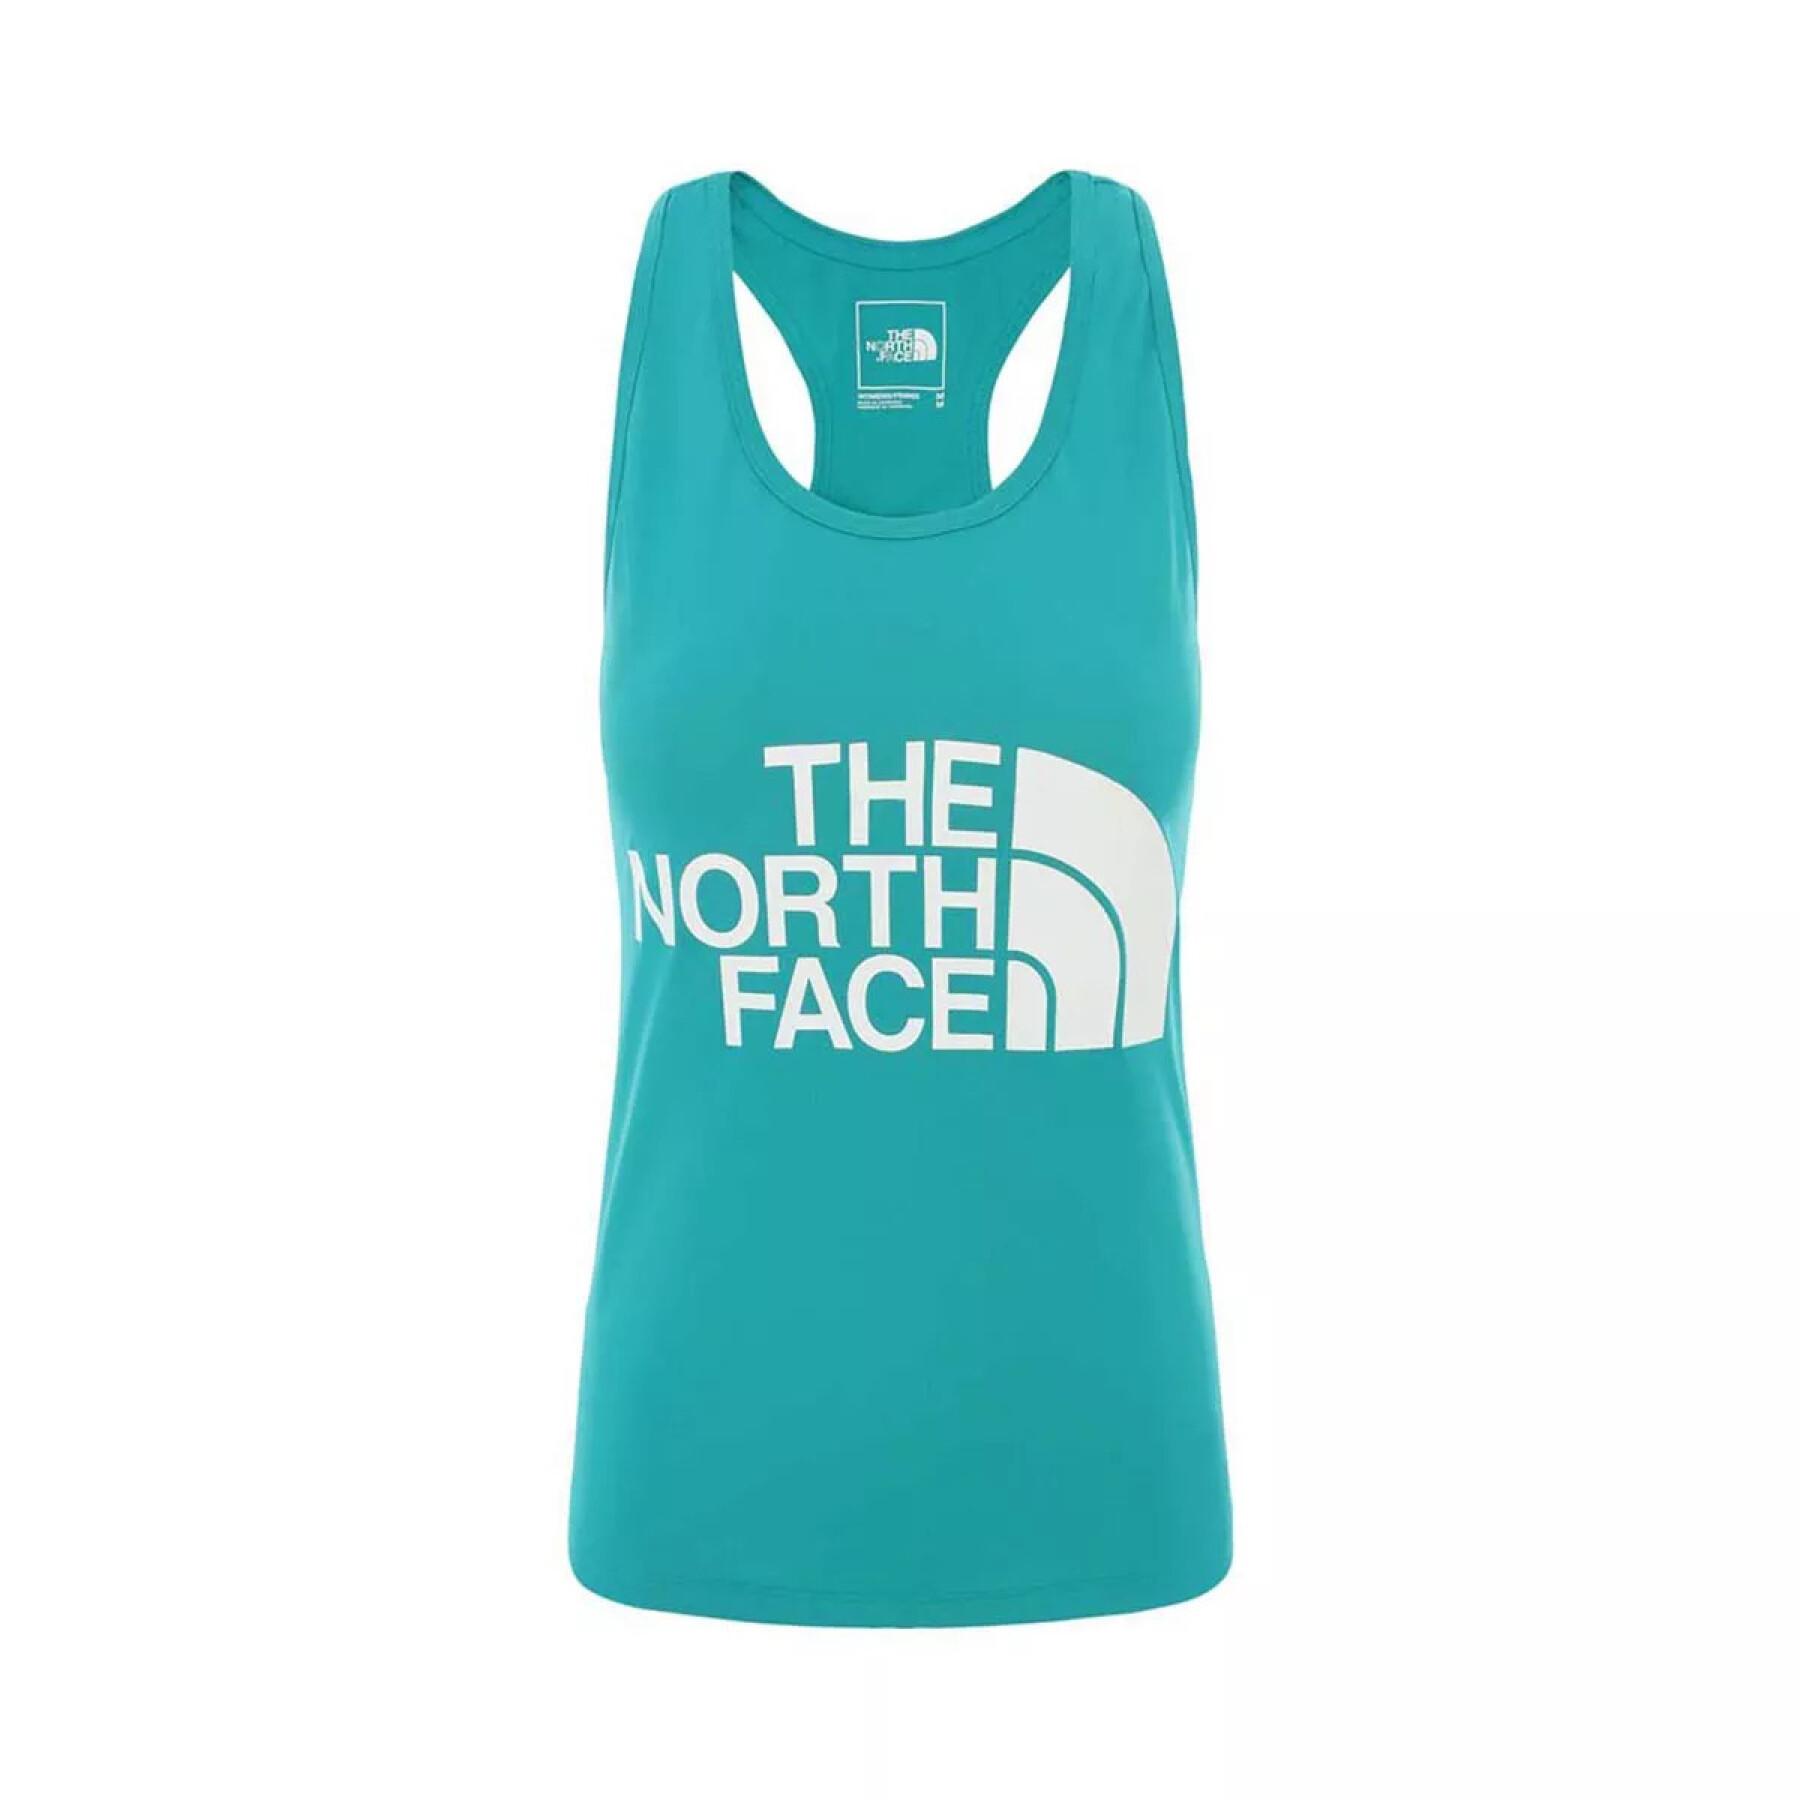 Tampo do tanque feminino The North Face Graphic Play Hard